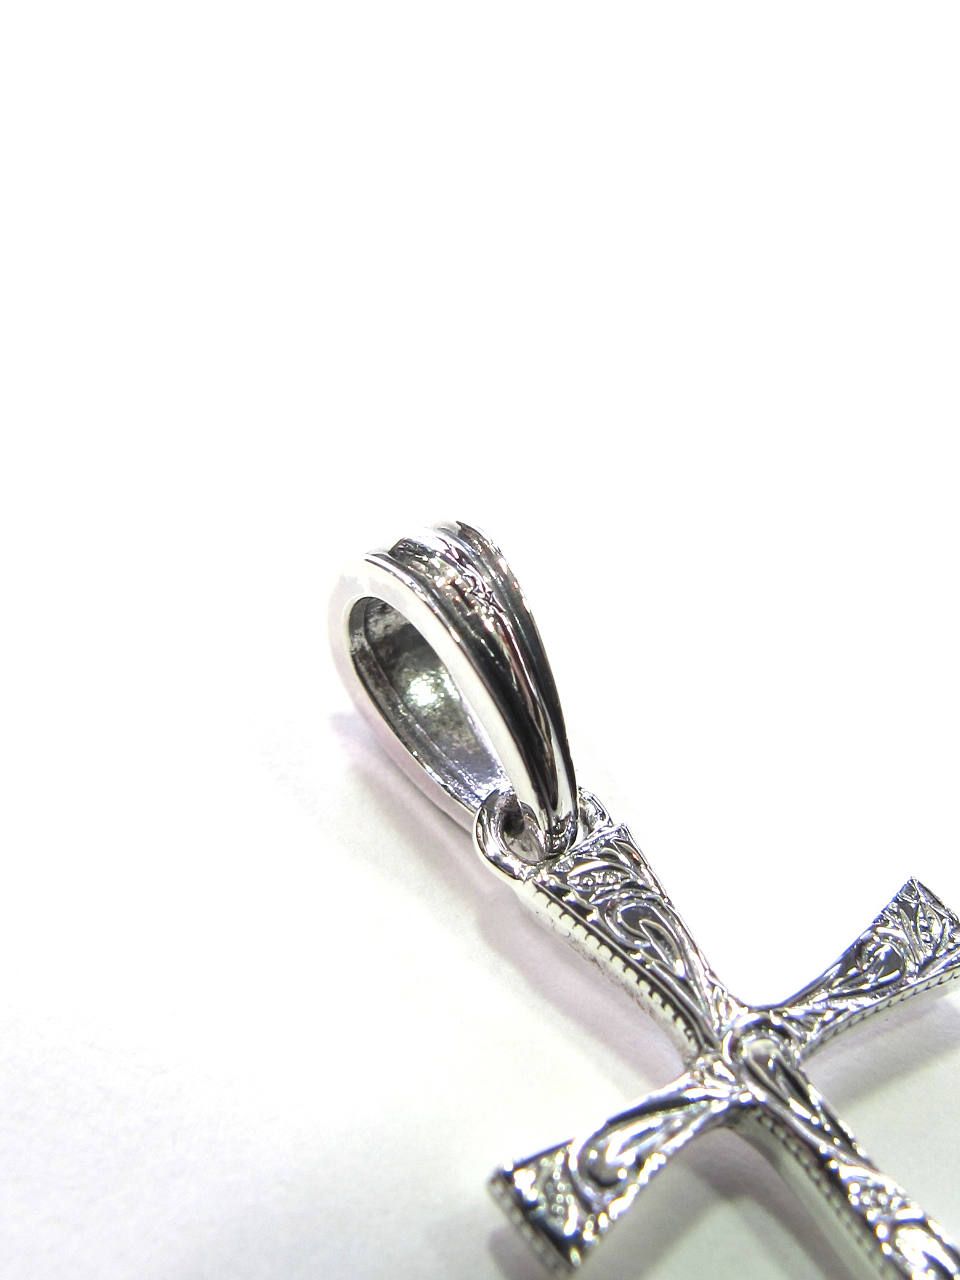 ANTIDOTE BUYERS CLUB - ENGRAVED TINY CROSS PENDANT (SILVER 